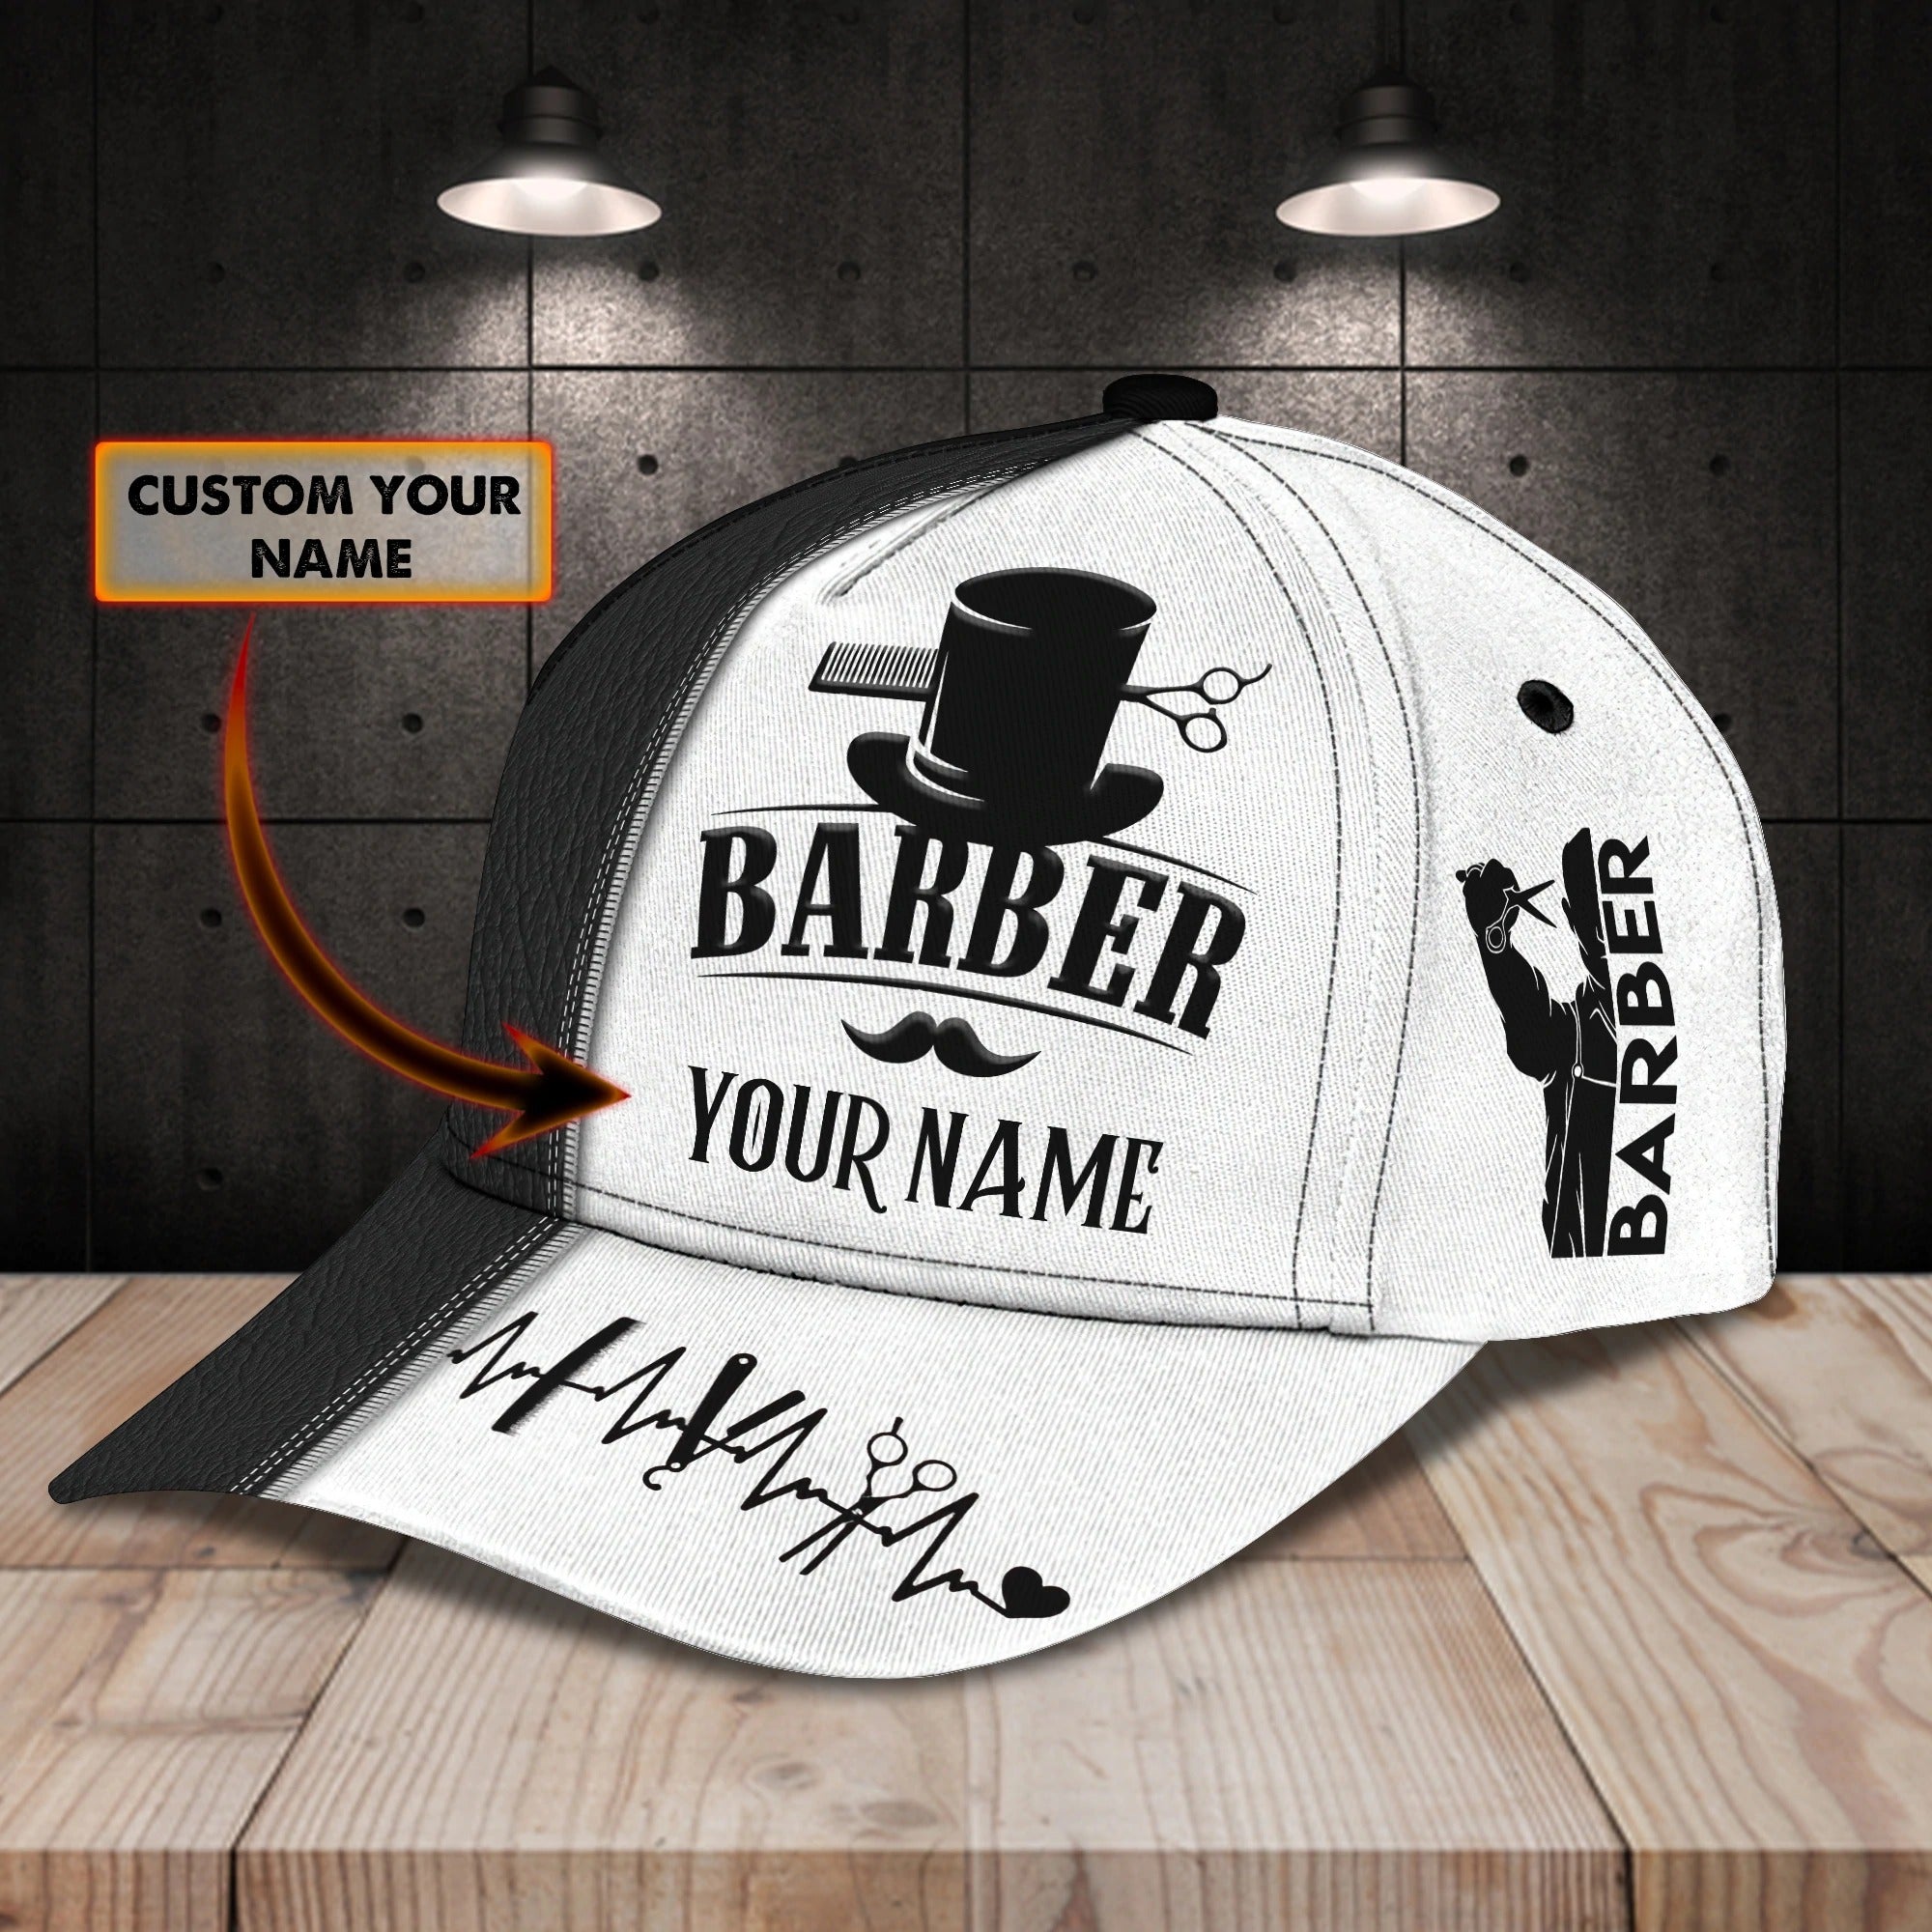 Personalized Barber Cap With Name/ Christmas Gift For Barber Man/ Barber Cap Hat Full Print